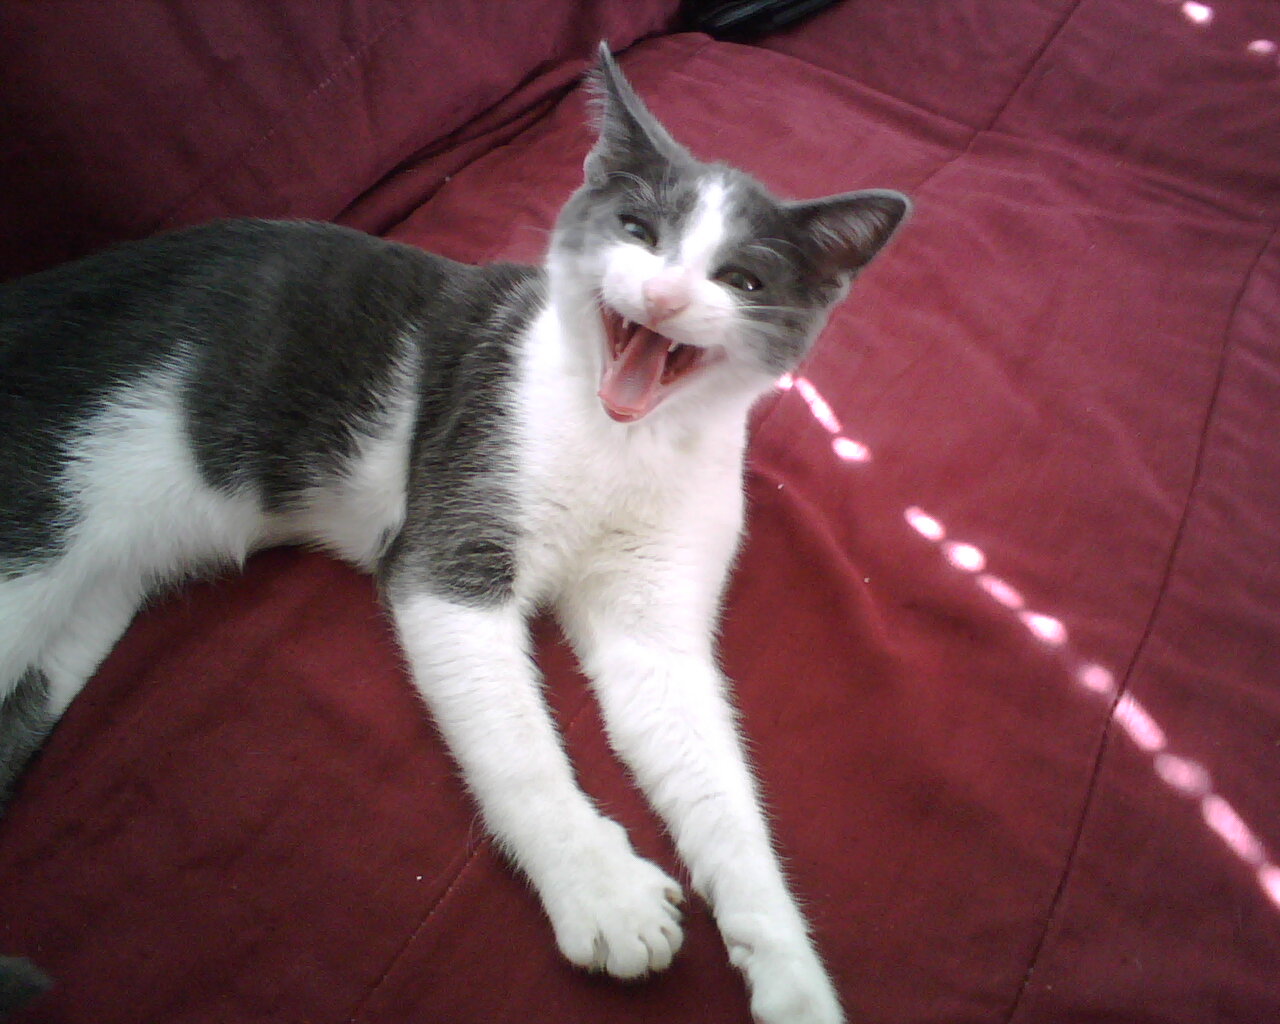 Kitten yawning? Kitten yelling?  Kitten surprised?  This is actually our little Captain Peanut yawning with his eyes open - he looks so surprised!